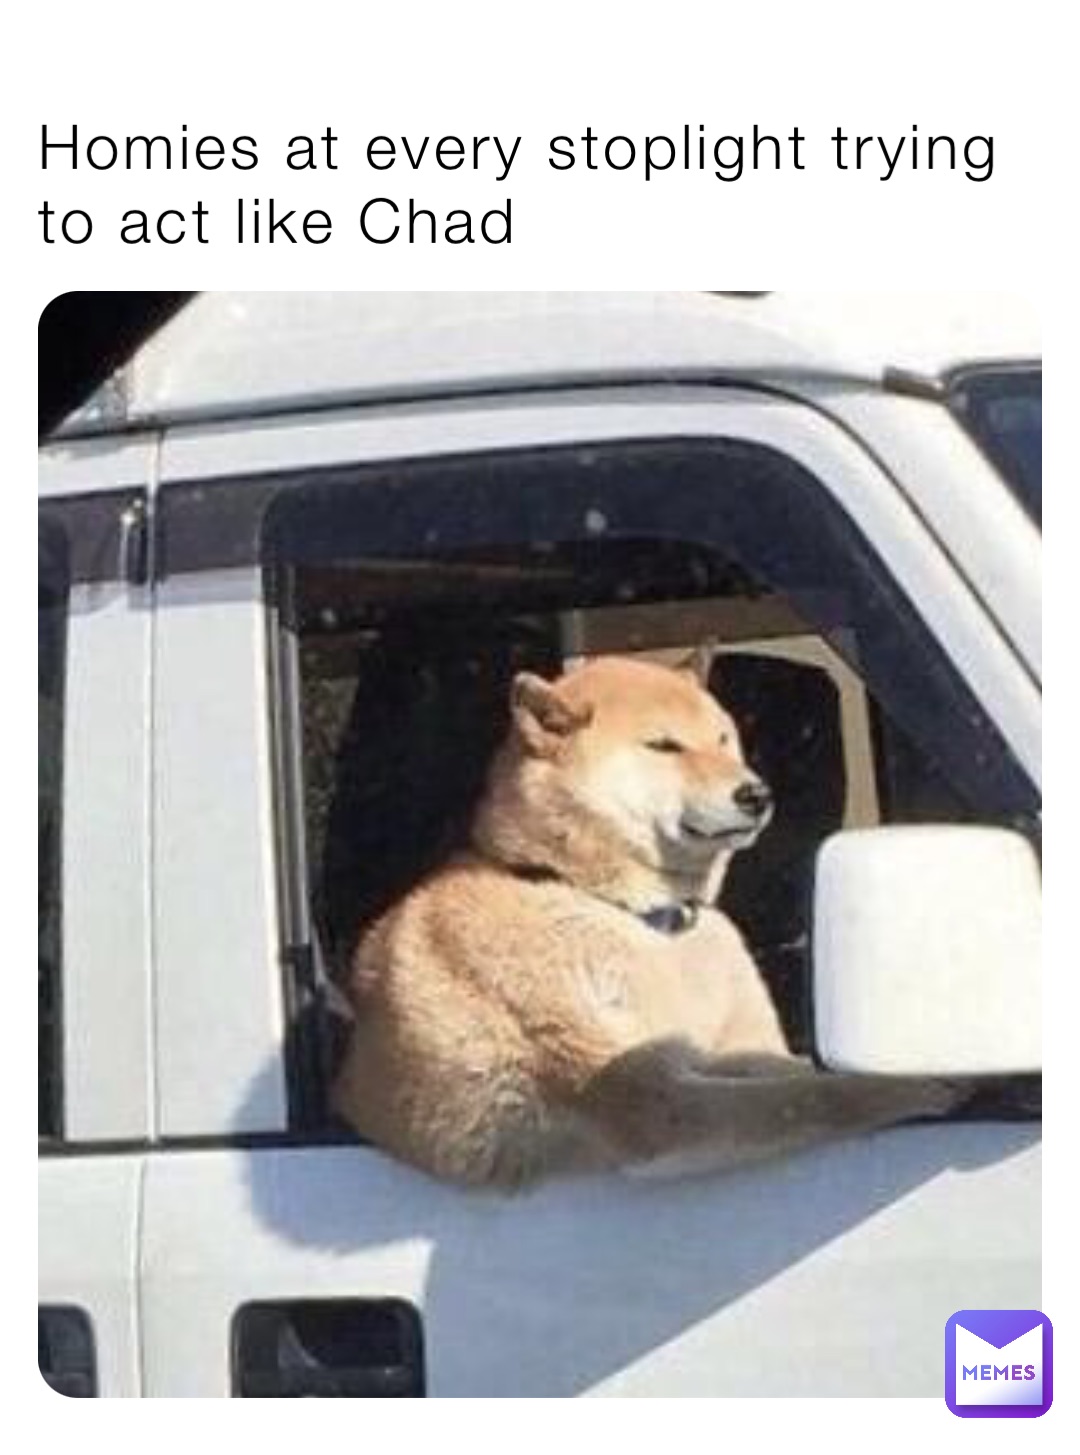 Homies at every stoplight trying to act like Chad